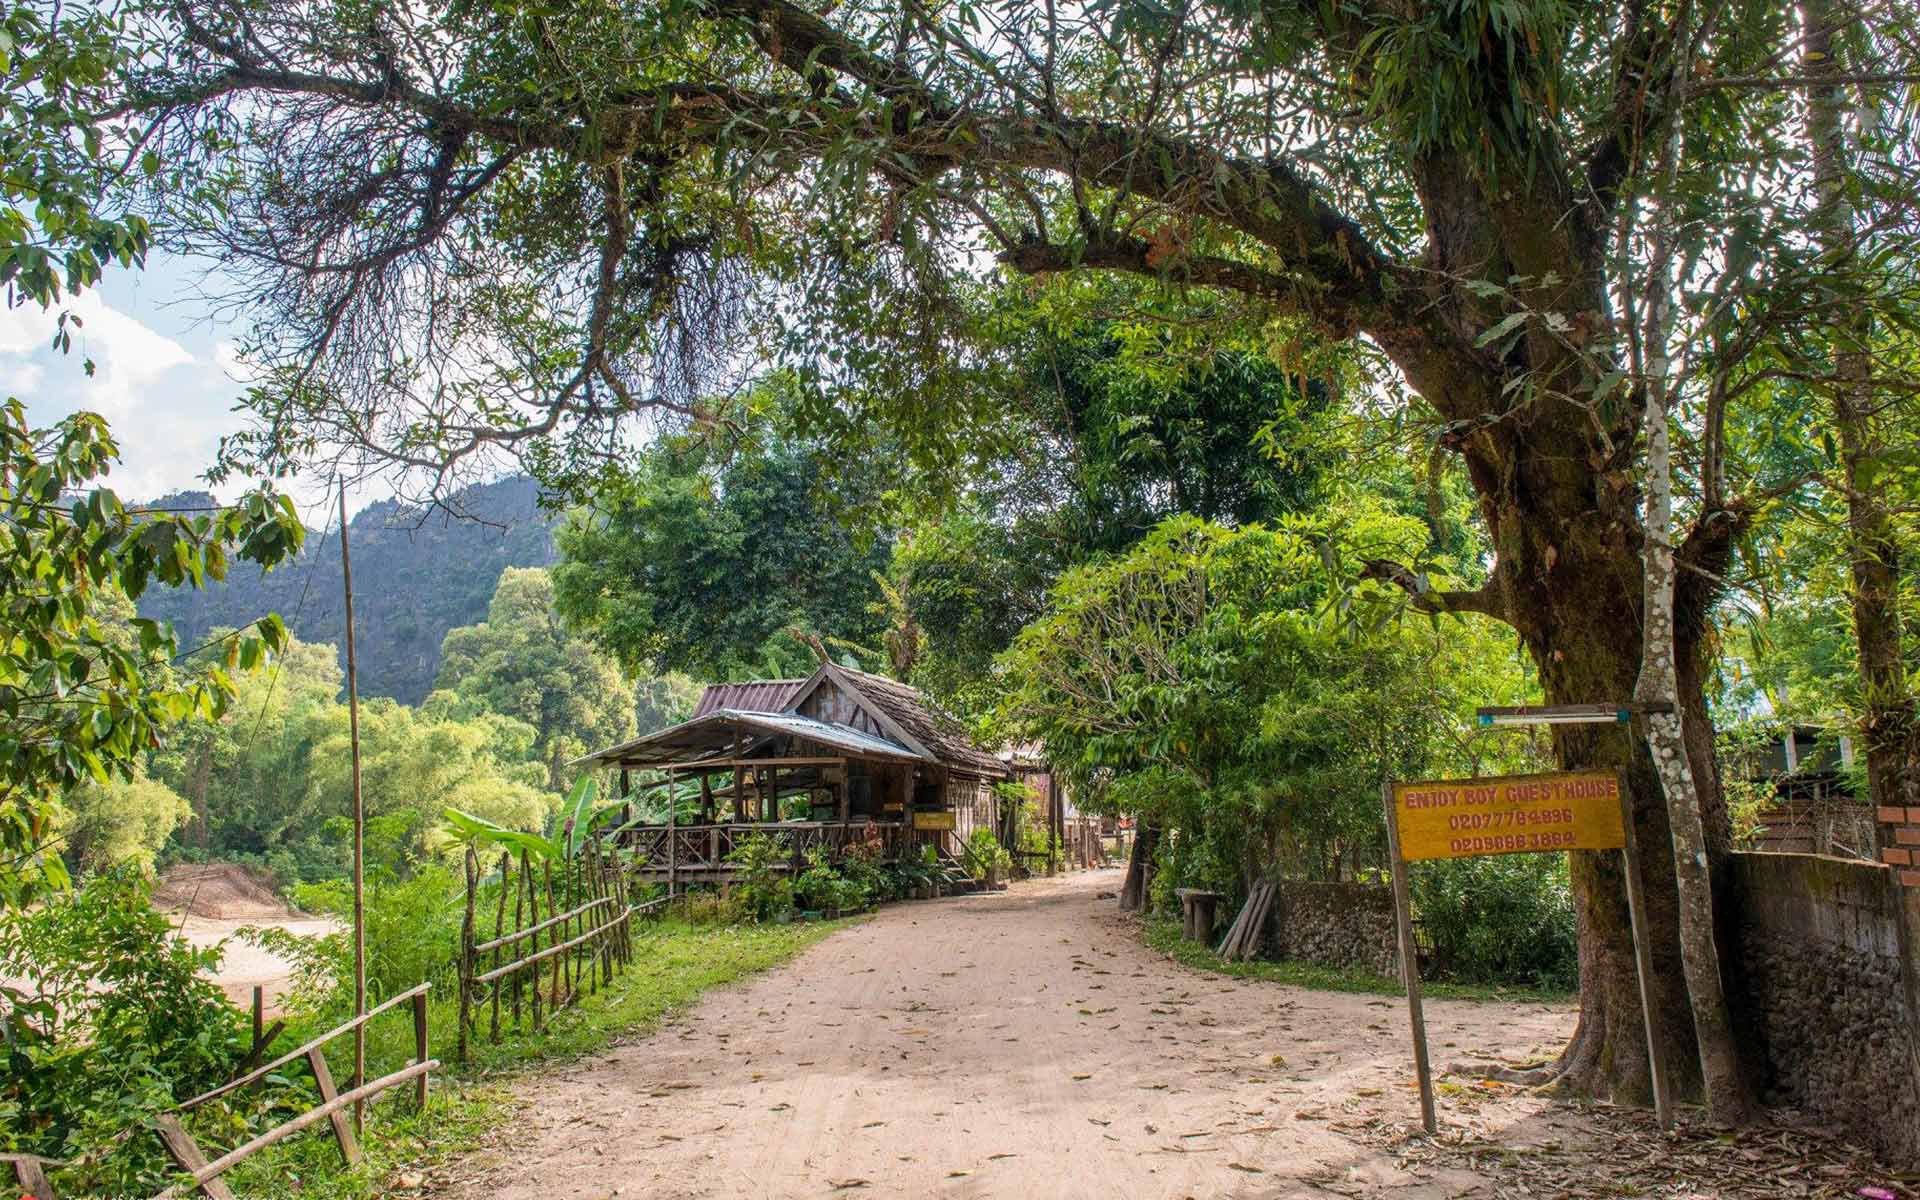 Konglor village - This place is very famous in Laos